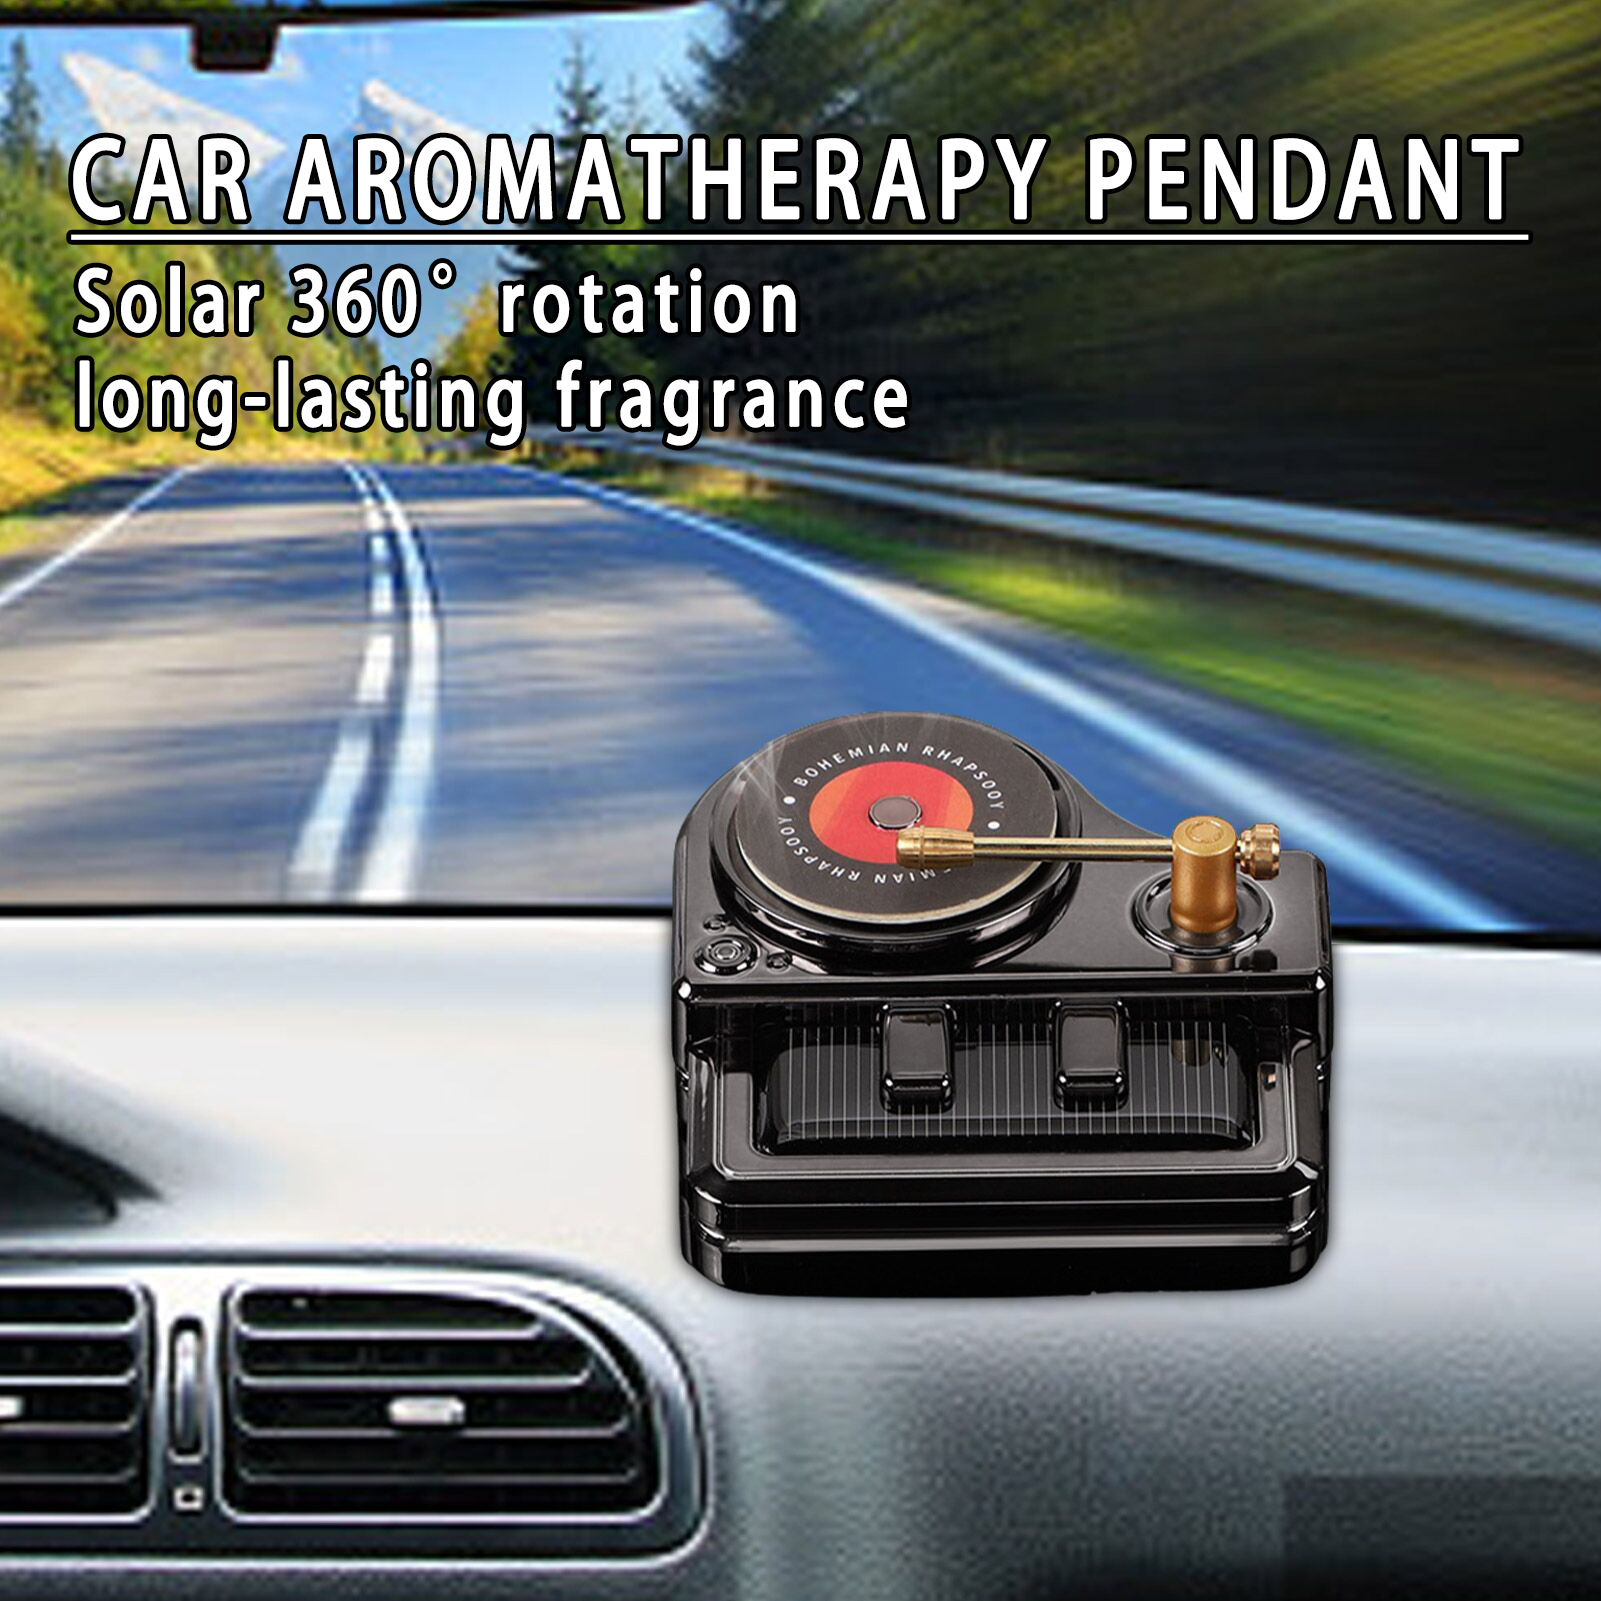  Solar Rotating Car Air Freshener, Car Essential Oil Diffuser  with 3 Natural Long-lasting Fragrance Aromatherapy Diffuser Car Interior  Decor Accessories for Men Women (Black) : Automotive